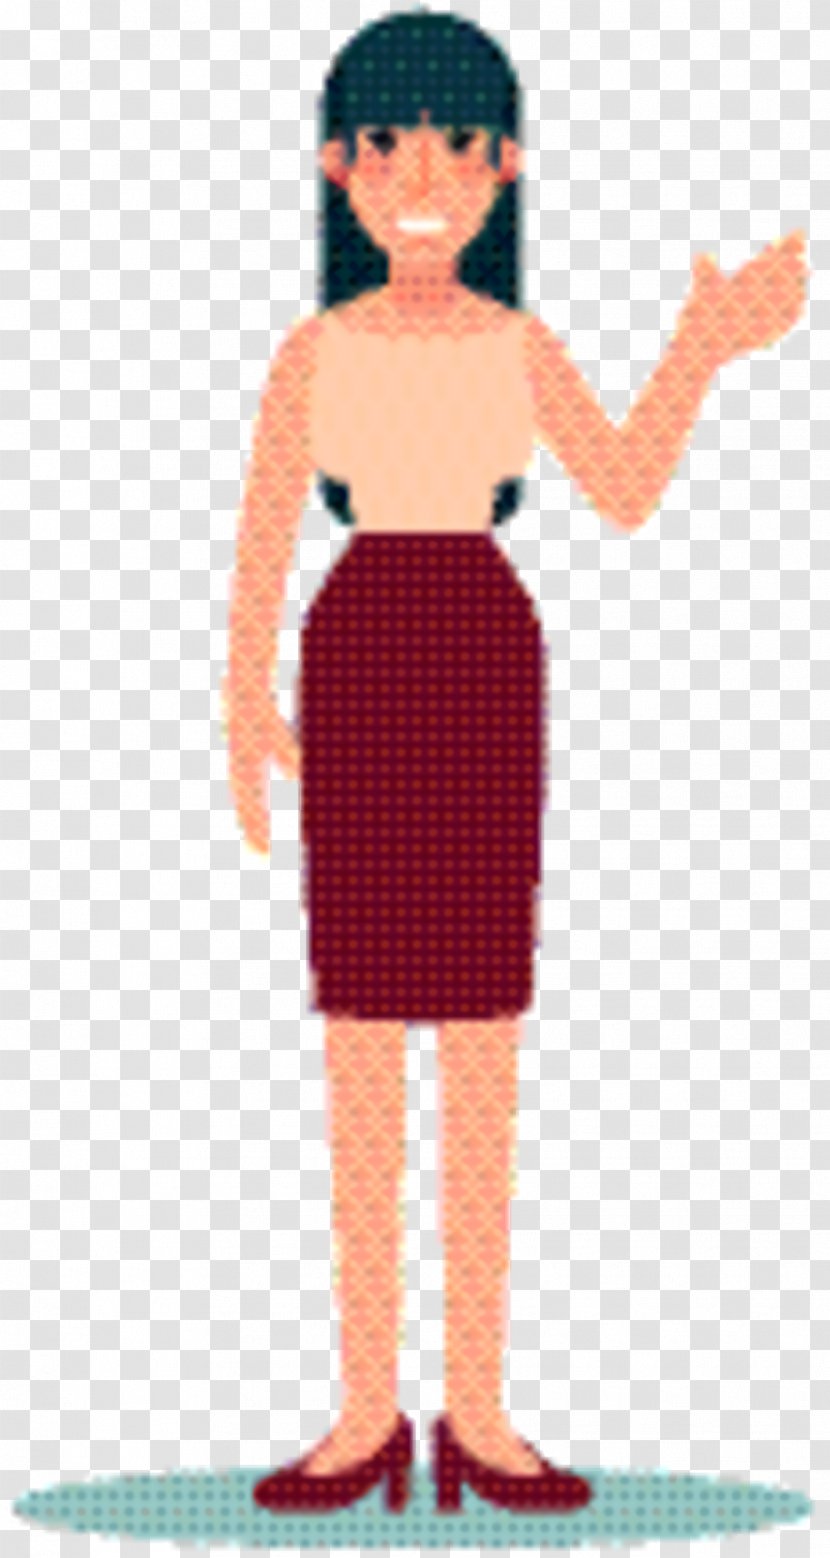 Cartoon Clothing - Toy - Day Dress Transparent PNG